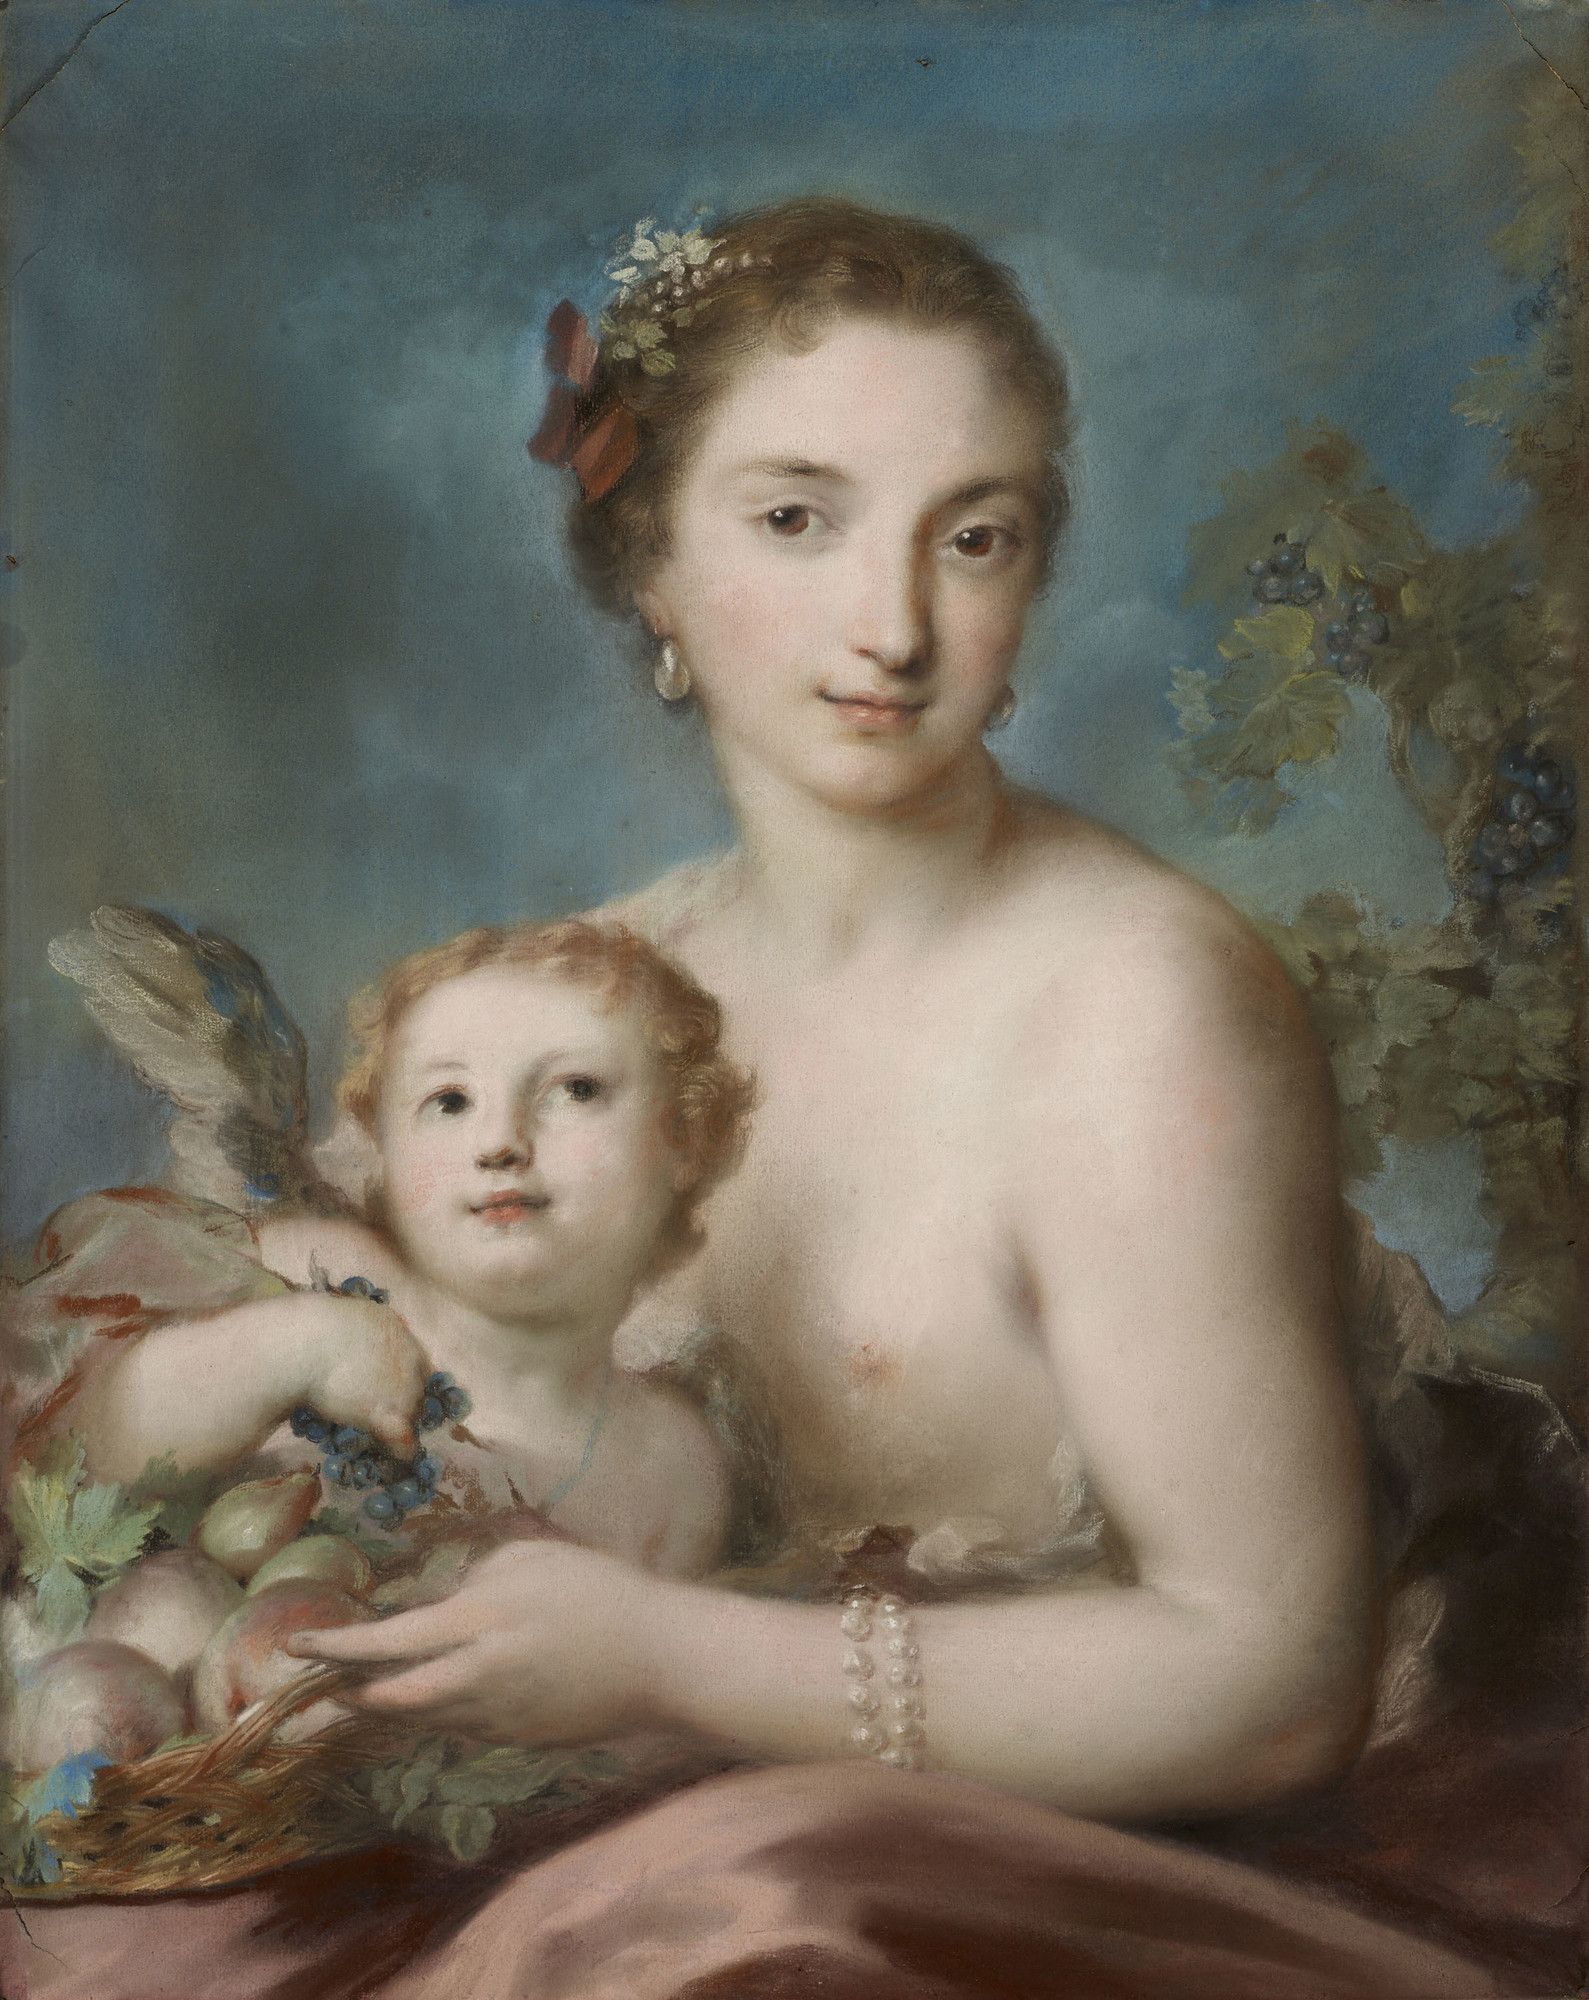 A half-length portrait of the personification of autumn, who is pictured as a young woman with a bare chest and pink robes draped in her lap. A putto sits in her lap and looks up towards her holding grapes plucked from the basket of fruit the young woman is holding. 